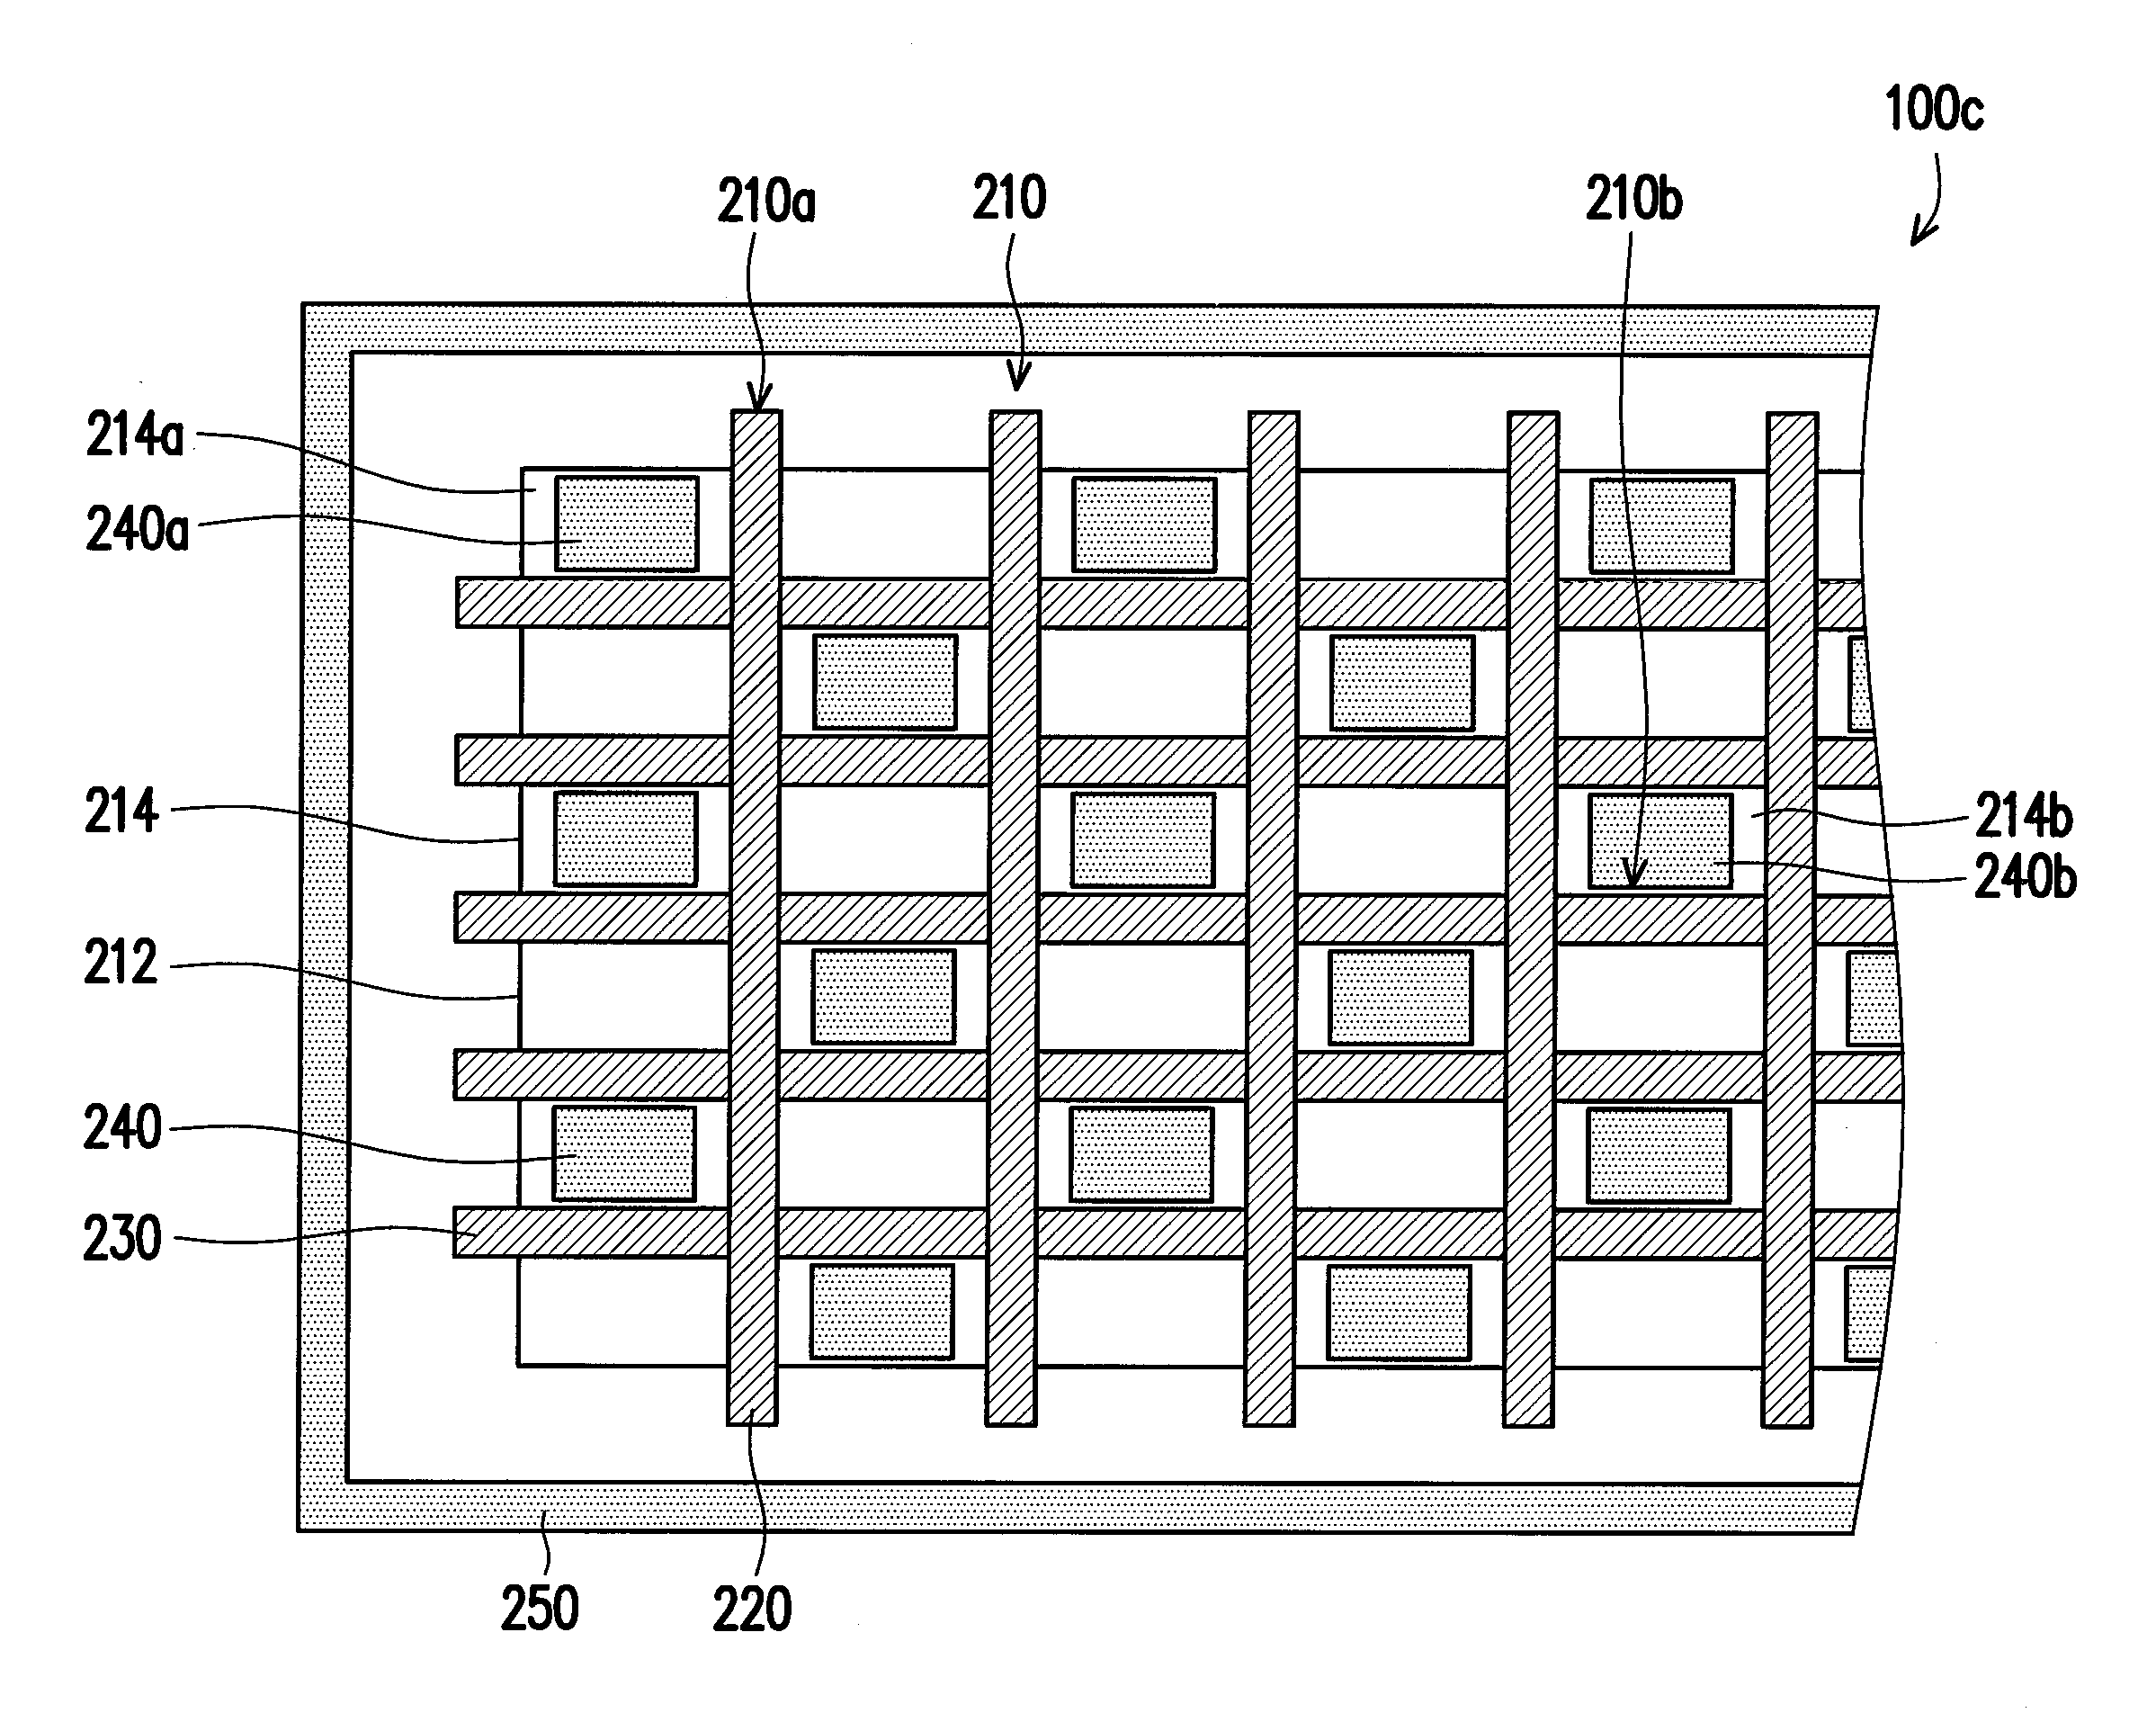 Electrostatic discharge protection structure